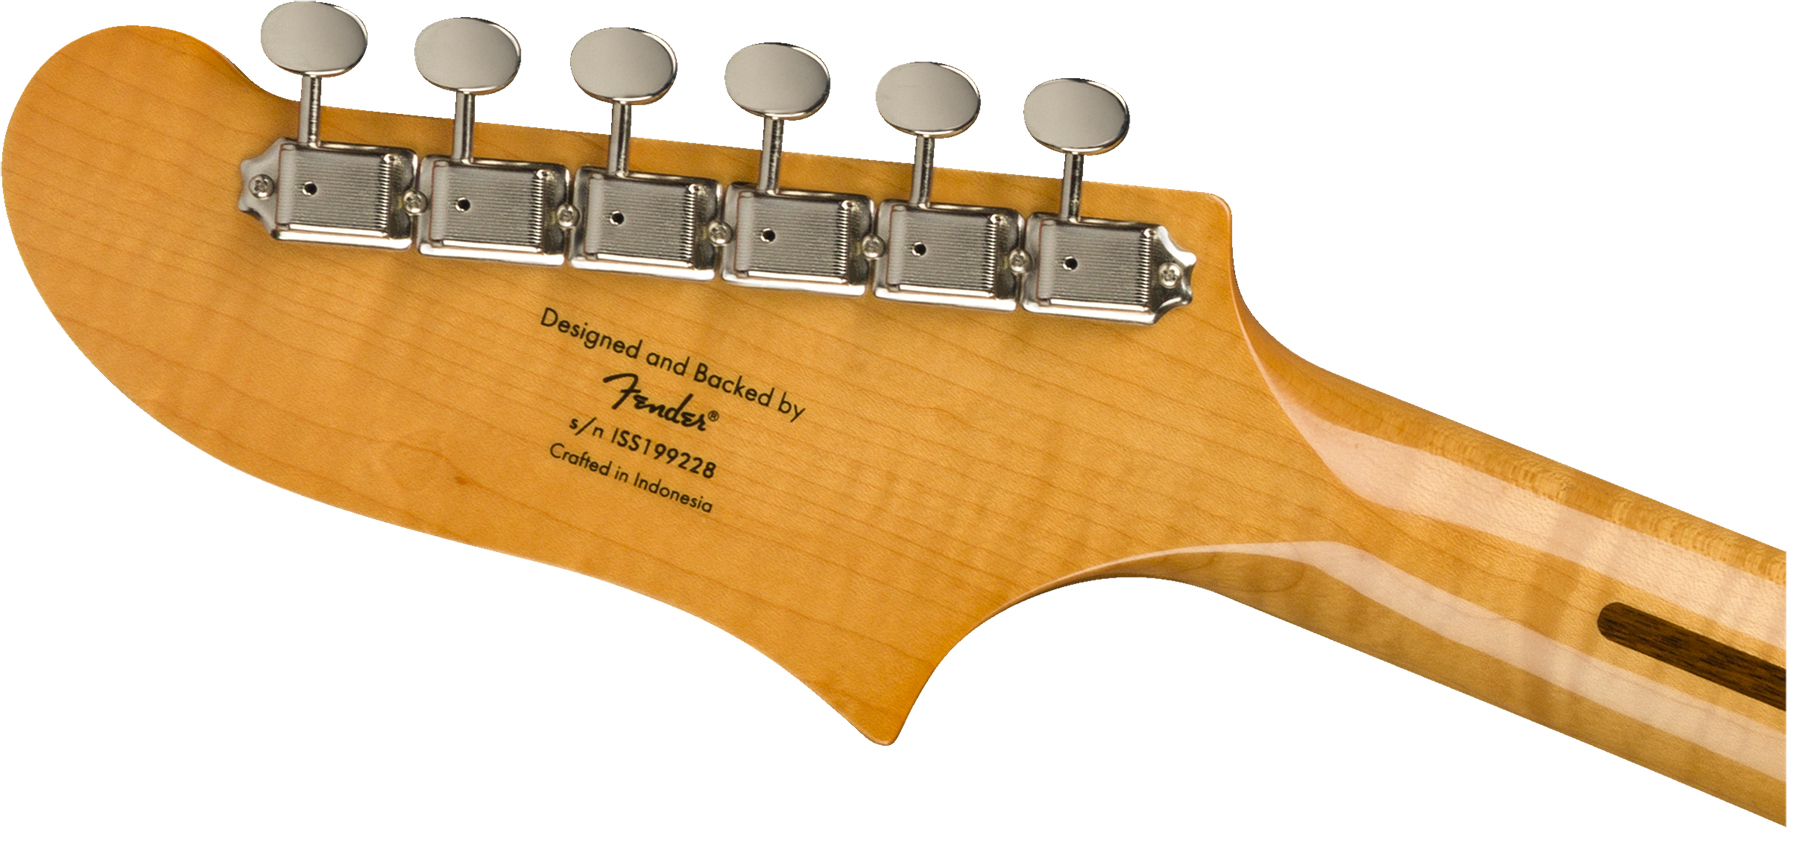 Squier Starcaster Classic Vibe 2019 Hh Ht Mn - Natural - Semi-hollow electric guitar - Variation 3